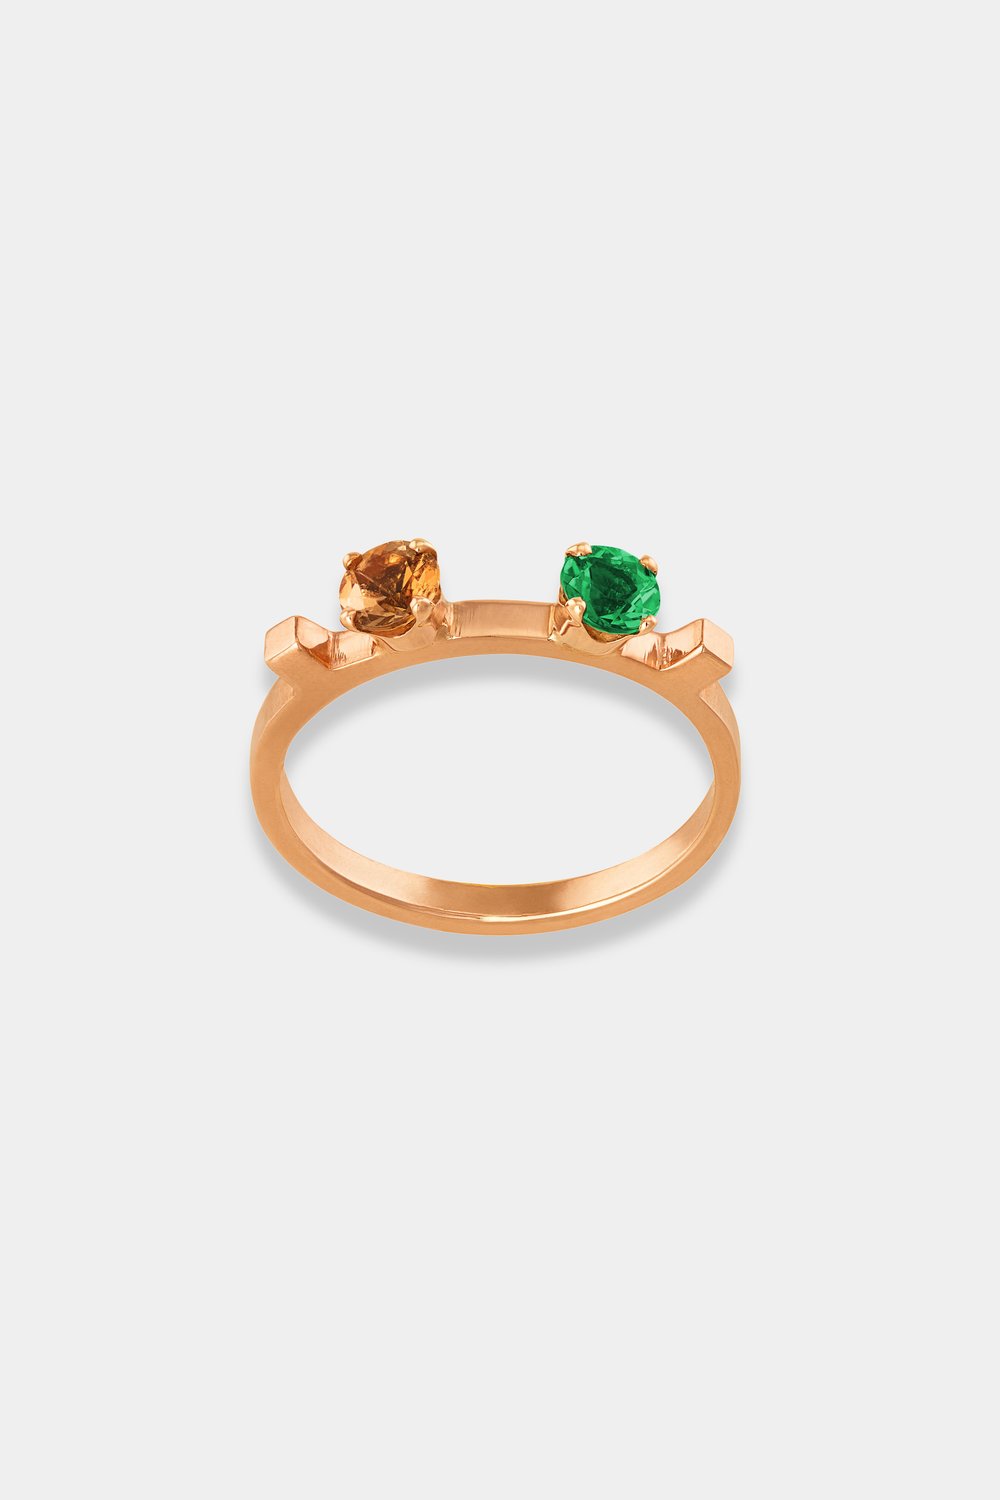 2 CUBES AND 2 STONES RING IN ROSE GOLD